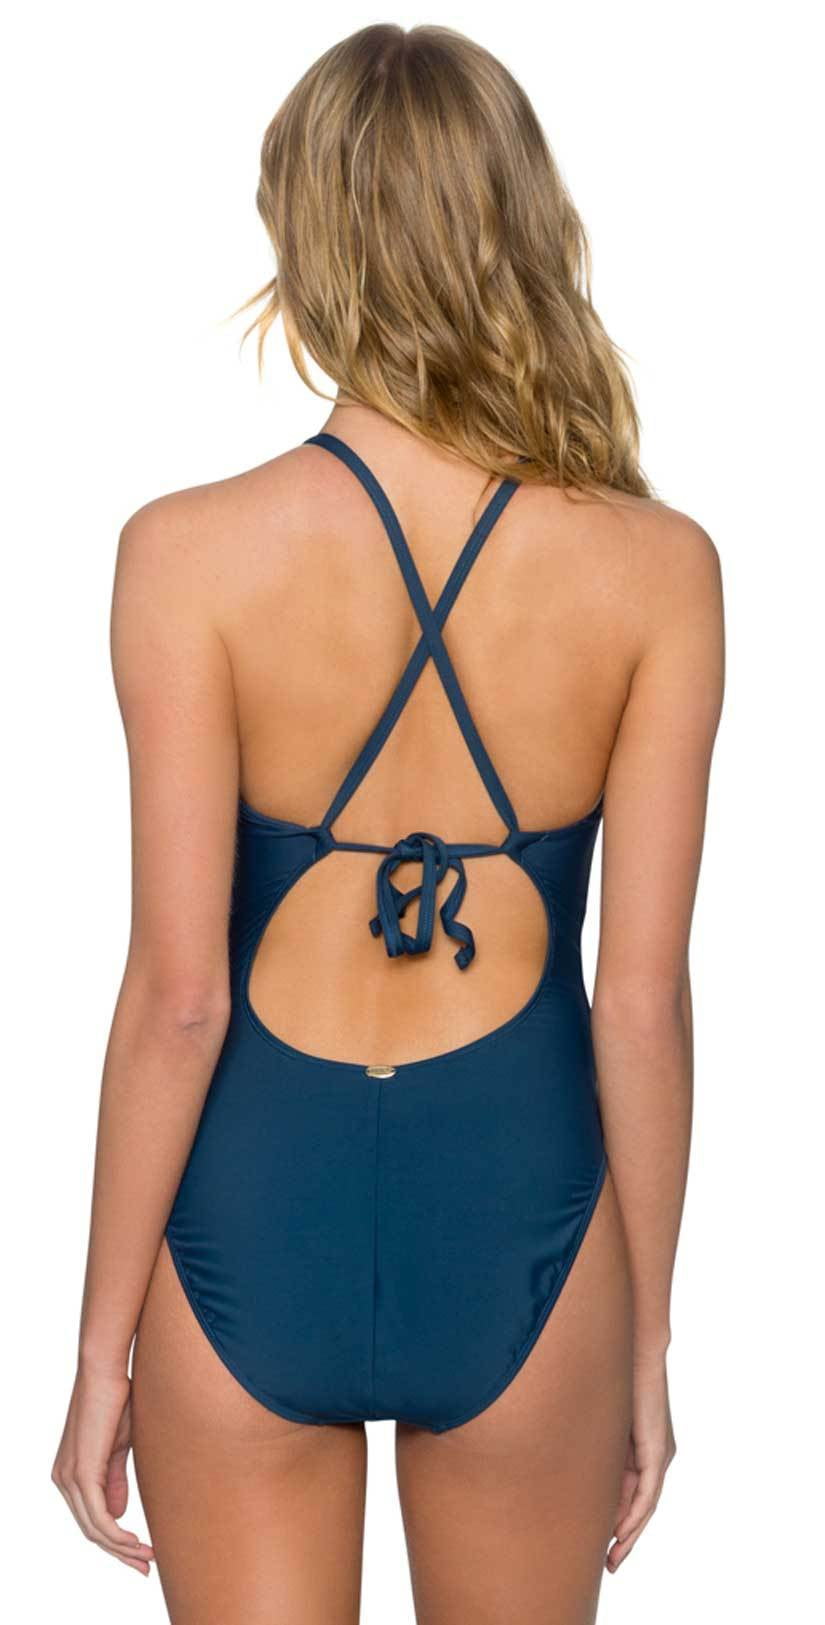 Sunsets Bond One Piece Swimsuit in Slate 110-SLTE: